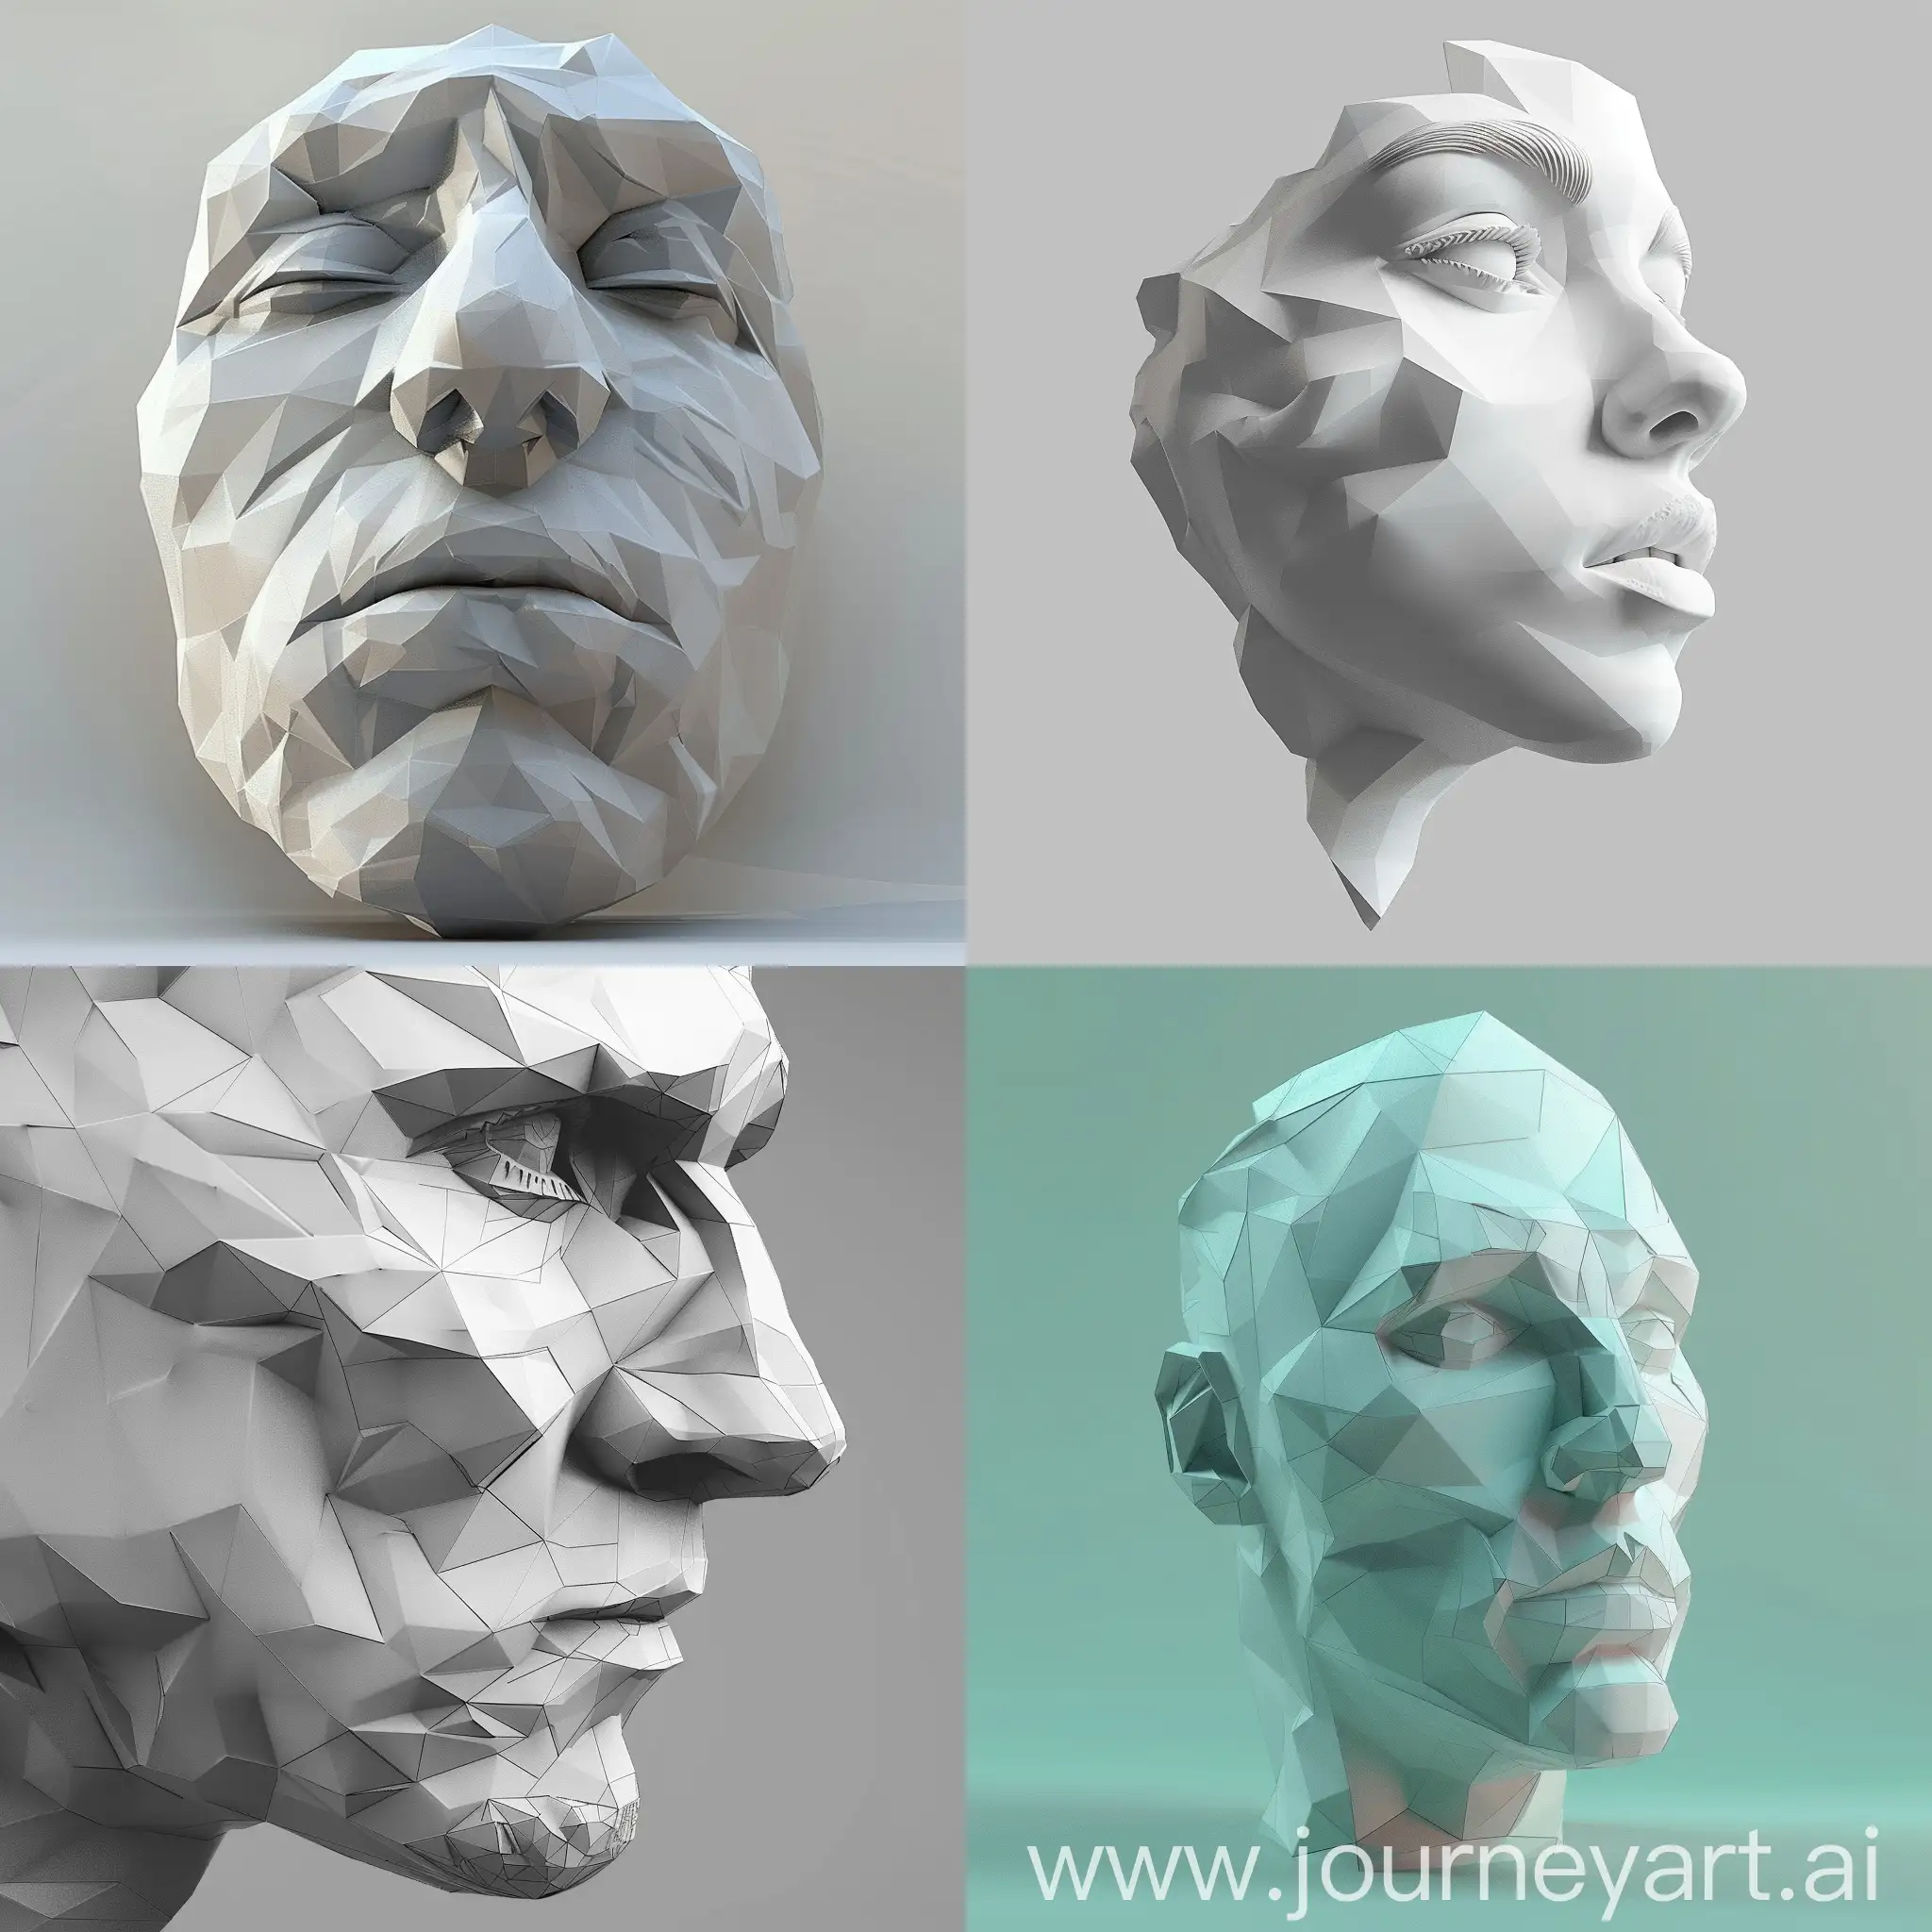 simple polygonal 3D model of a human face